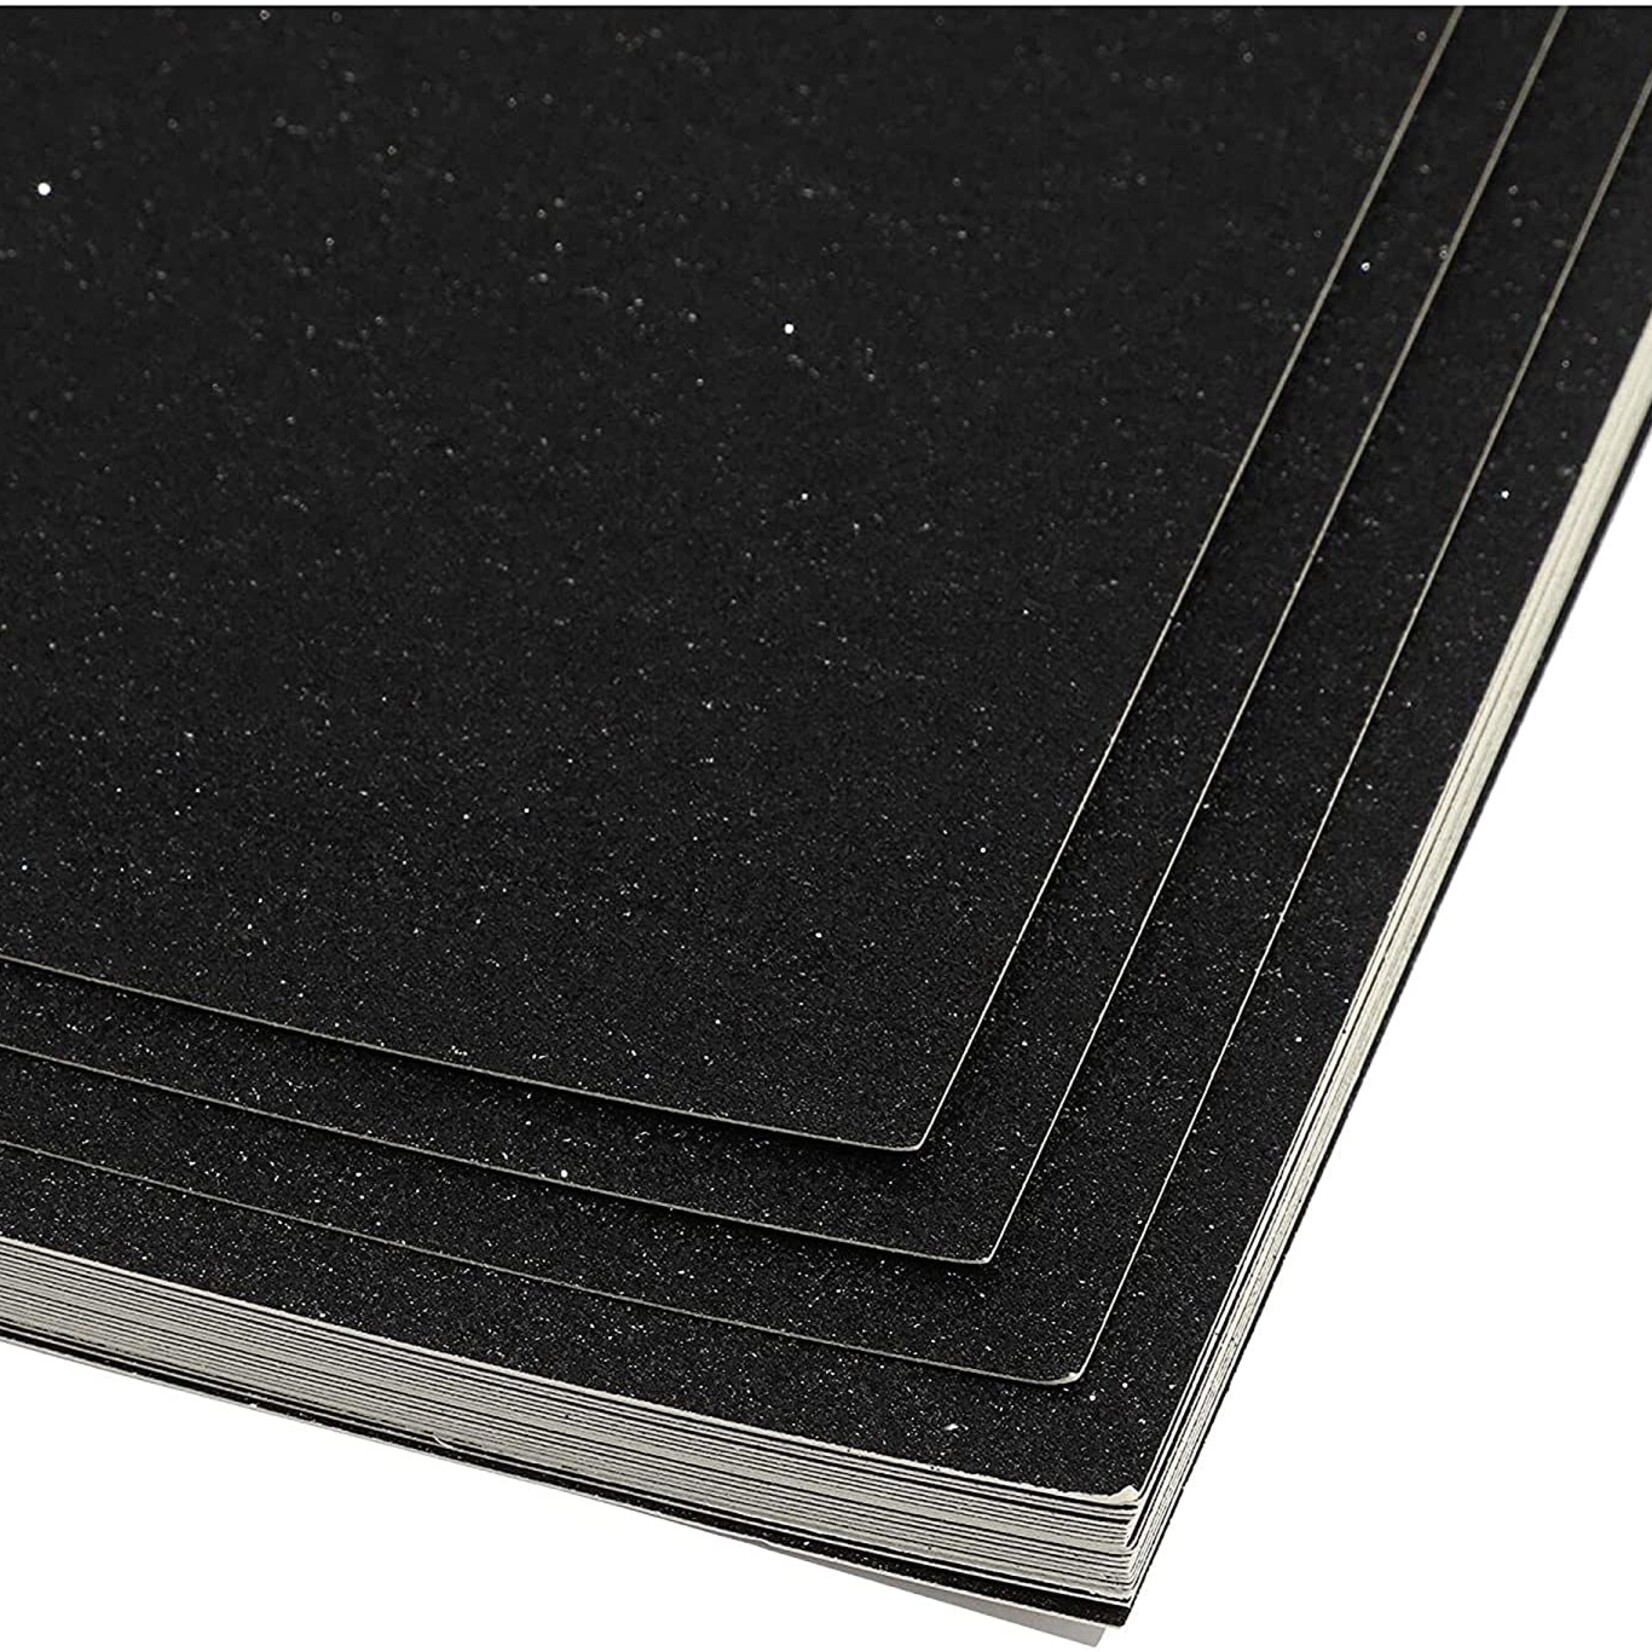 Glitter Card Stock 360 GSM 19 5/8 x 27 1/2 Inches Black